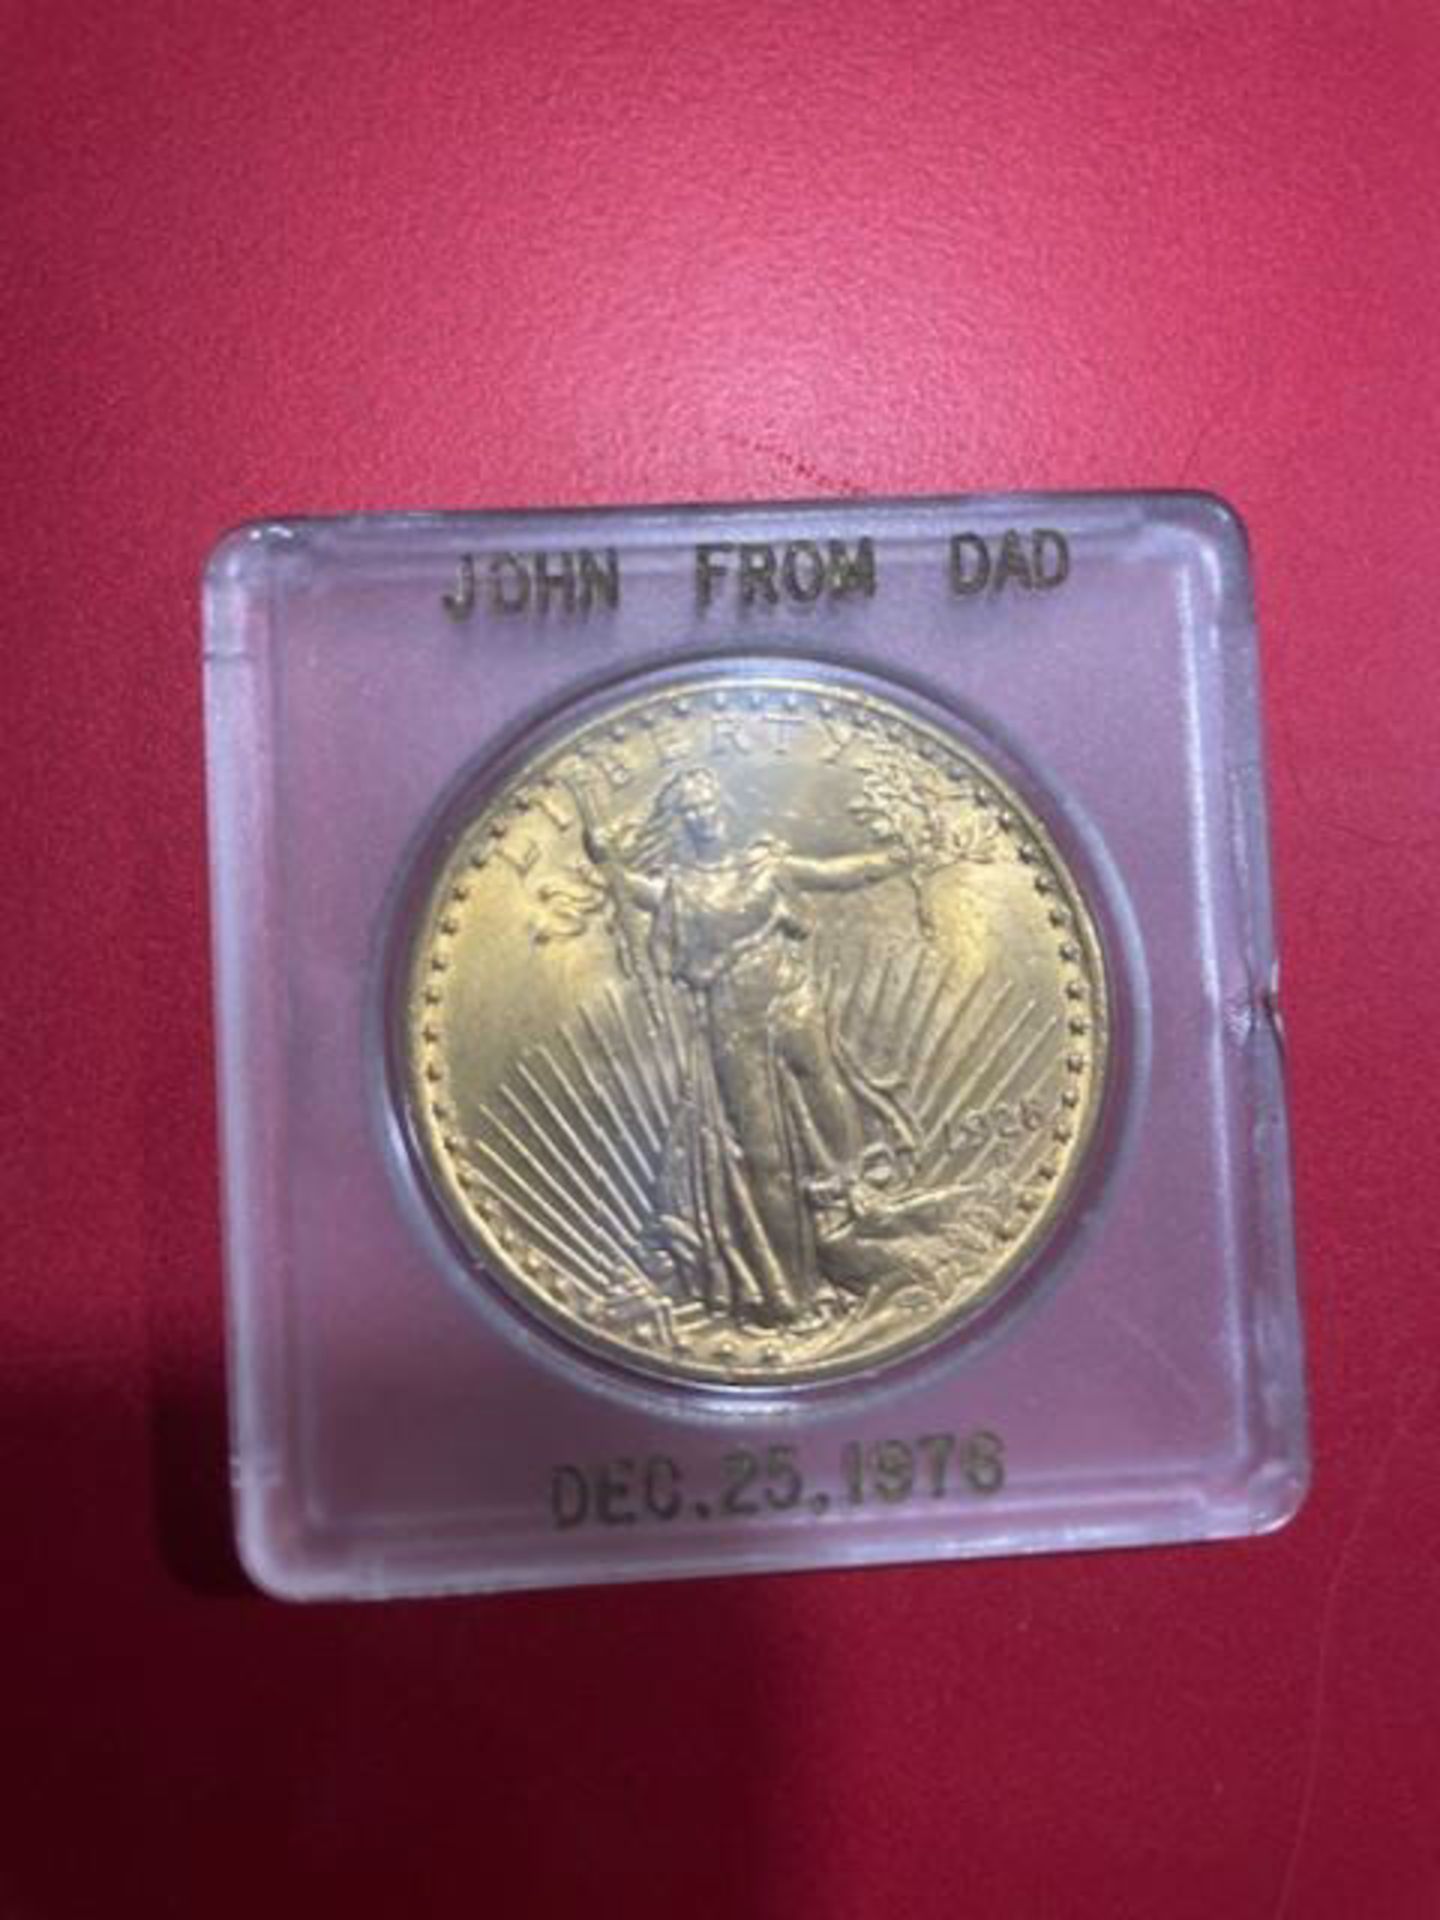 1928 St. Gaudens Double Eagle $20 Gold Coin - Image 6 of 12